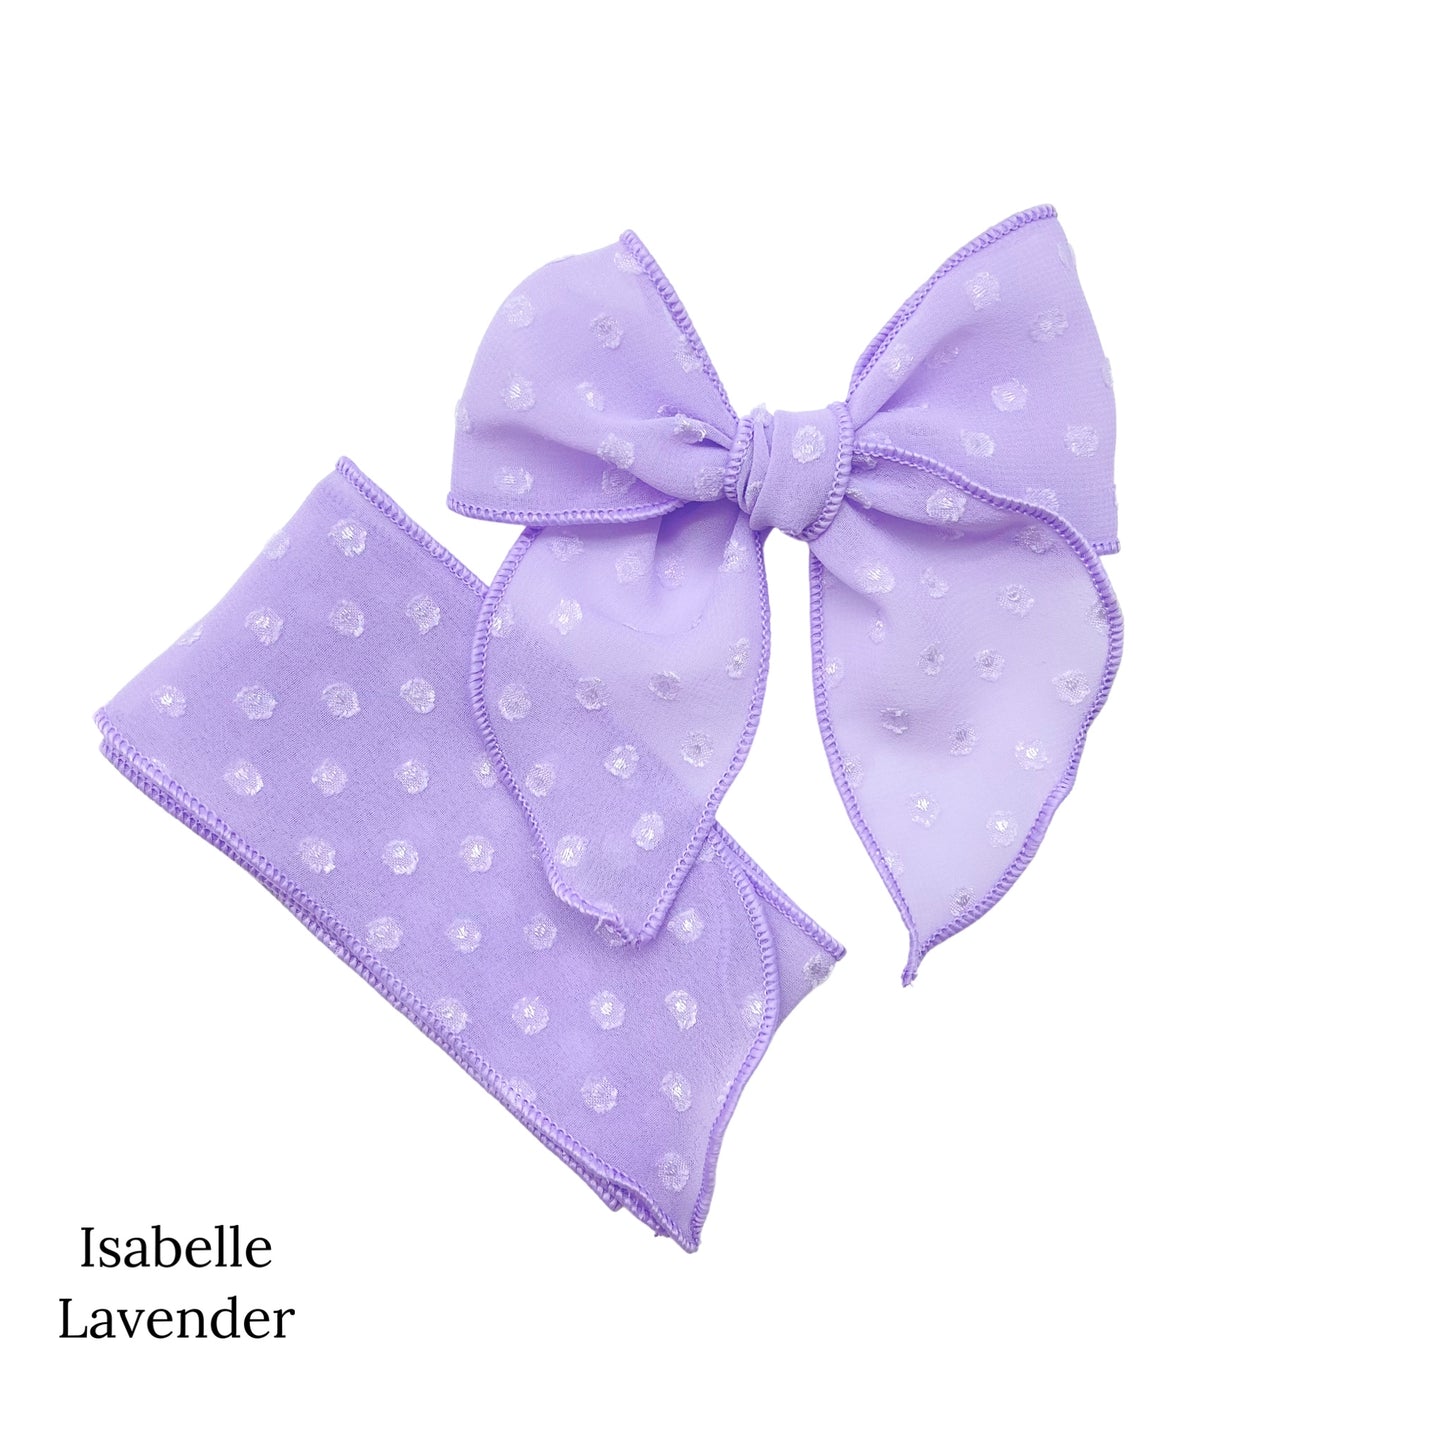 Spring frayed dot fabric bow strips. Lavender colored serger style bow strip.